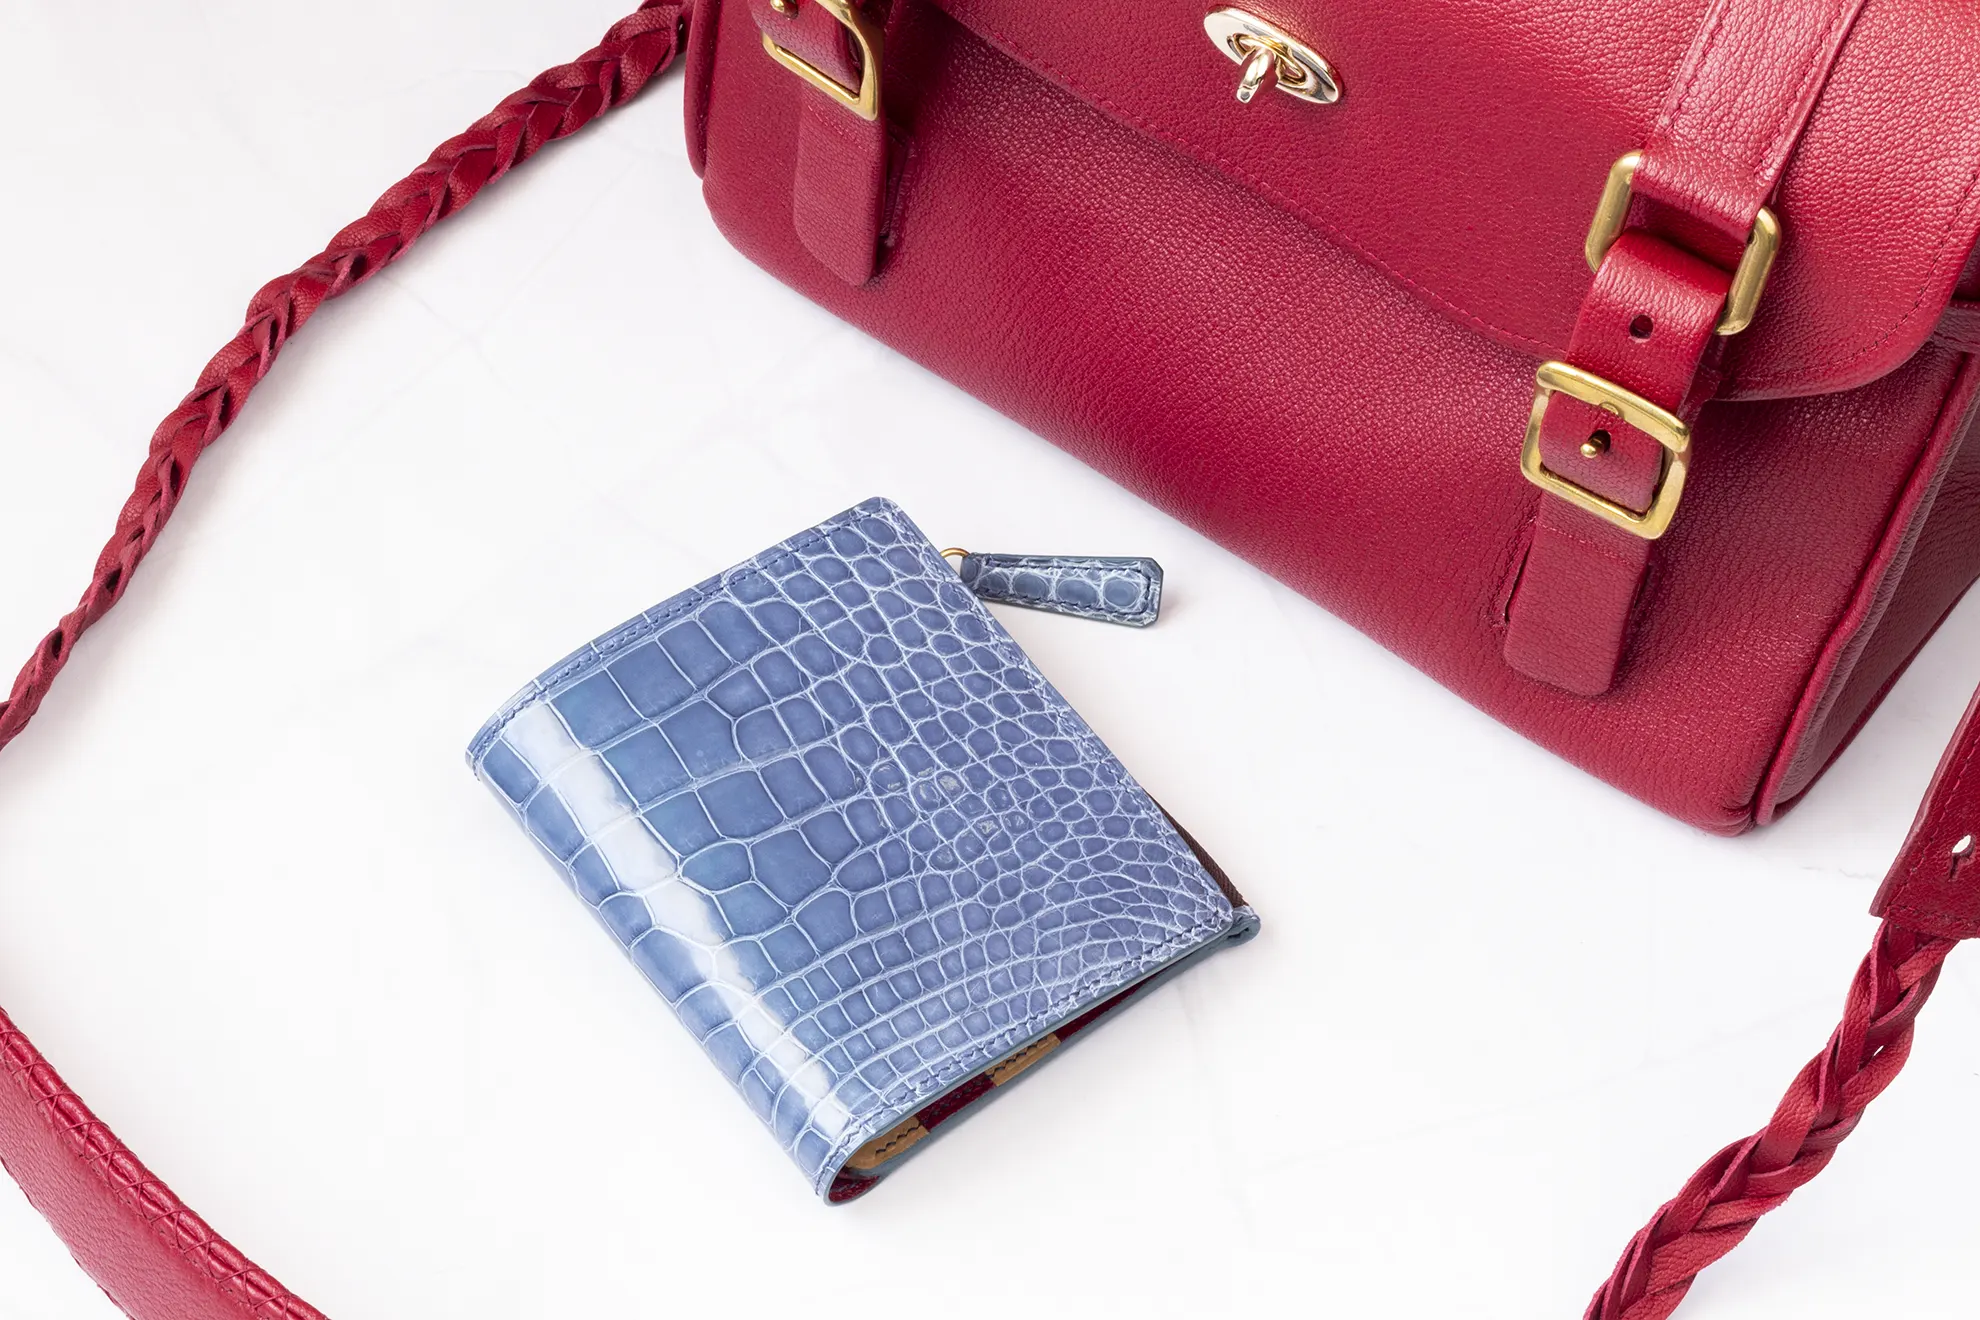 Possala Designs red leather handbag with blue wallet